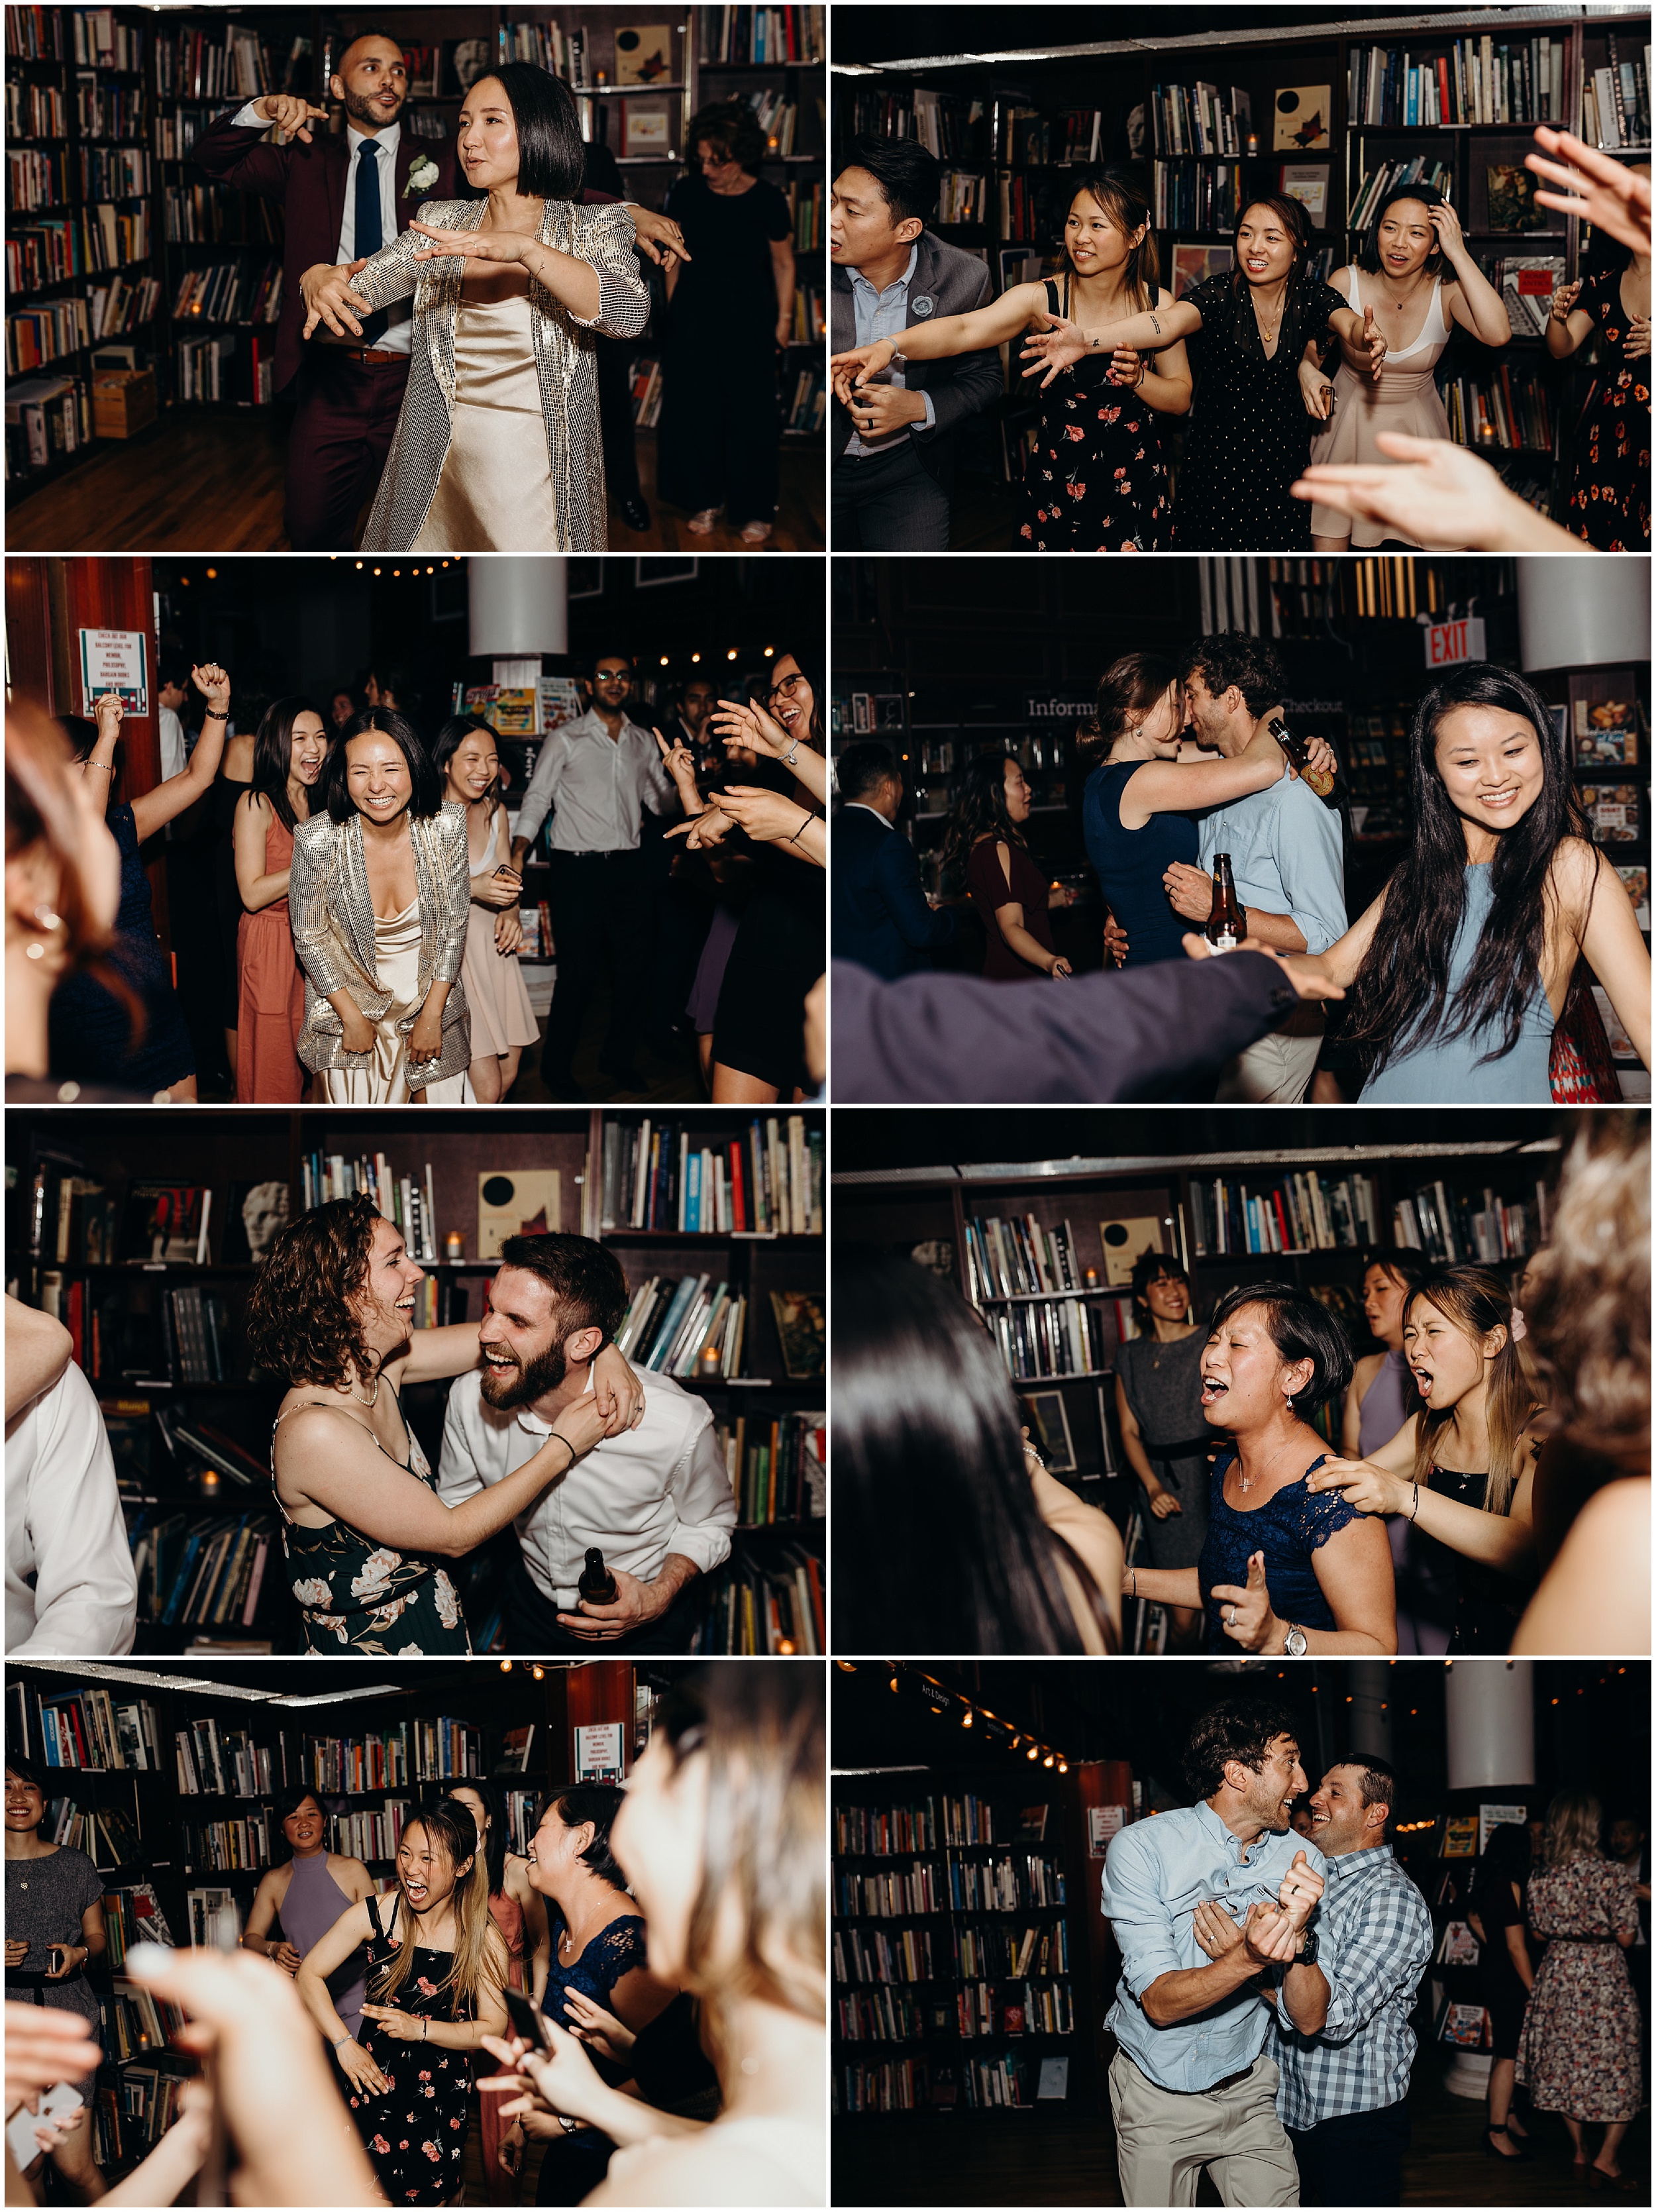 guests dance during a wedding reception at housingworks bookstore in new york, new york